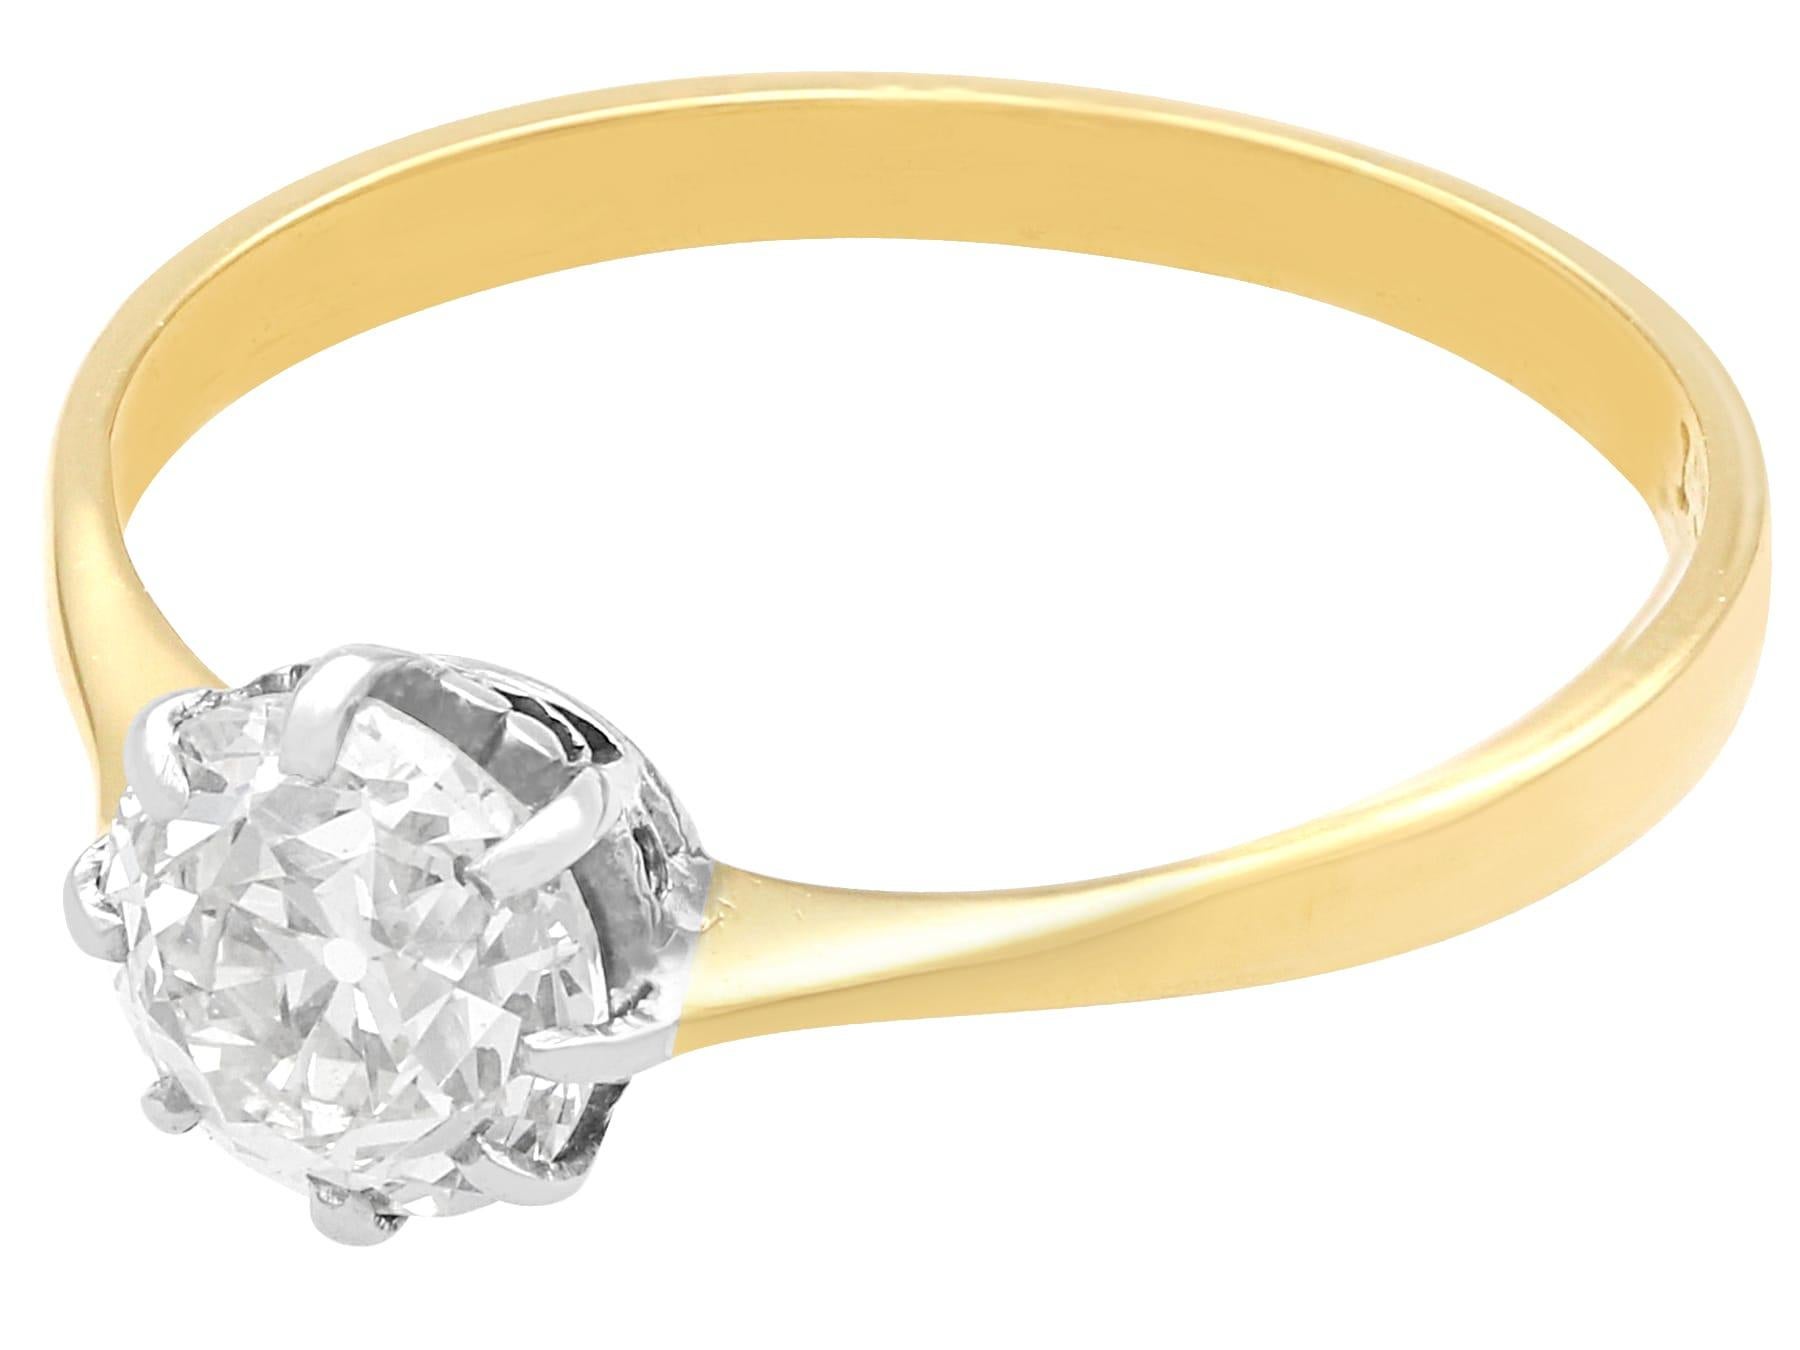 Round Cut Antique 1.05Ct Diamond and 18k Yellow Gold Solitaire Ring Circa 1900 For Sale